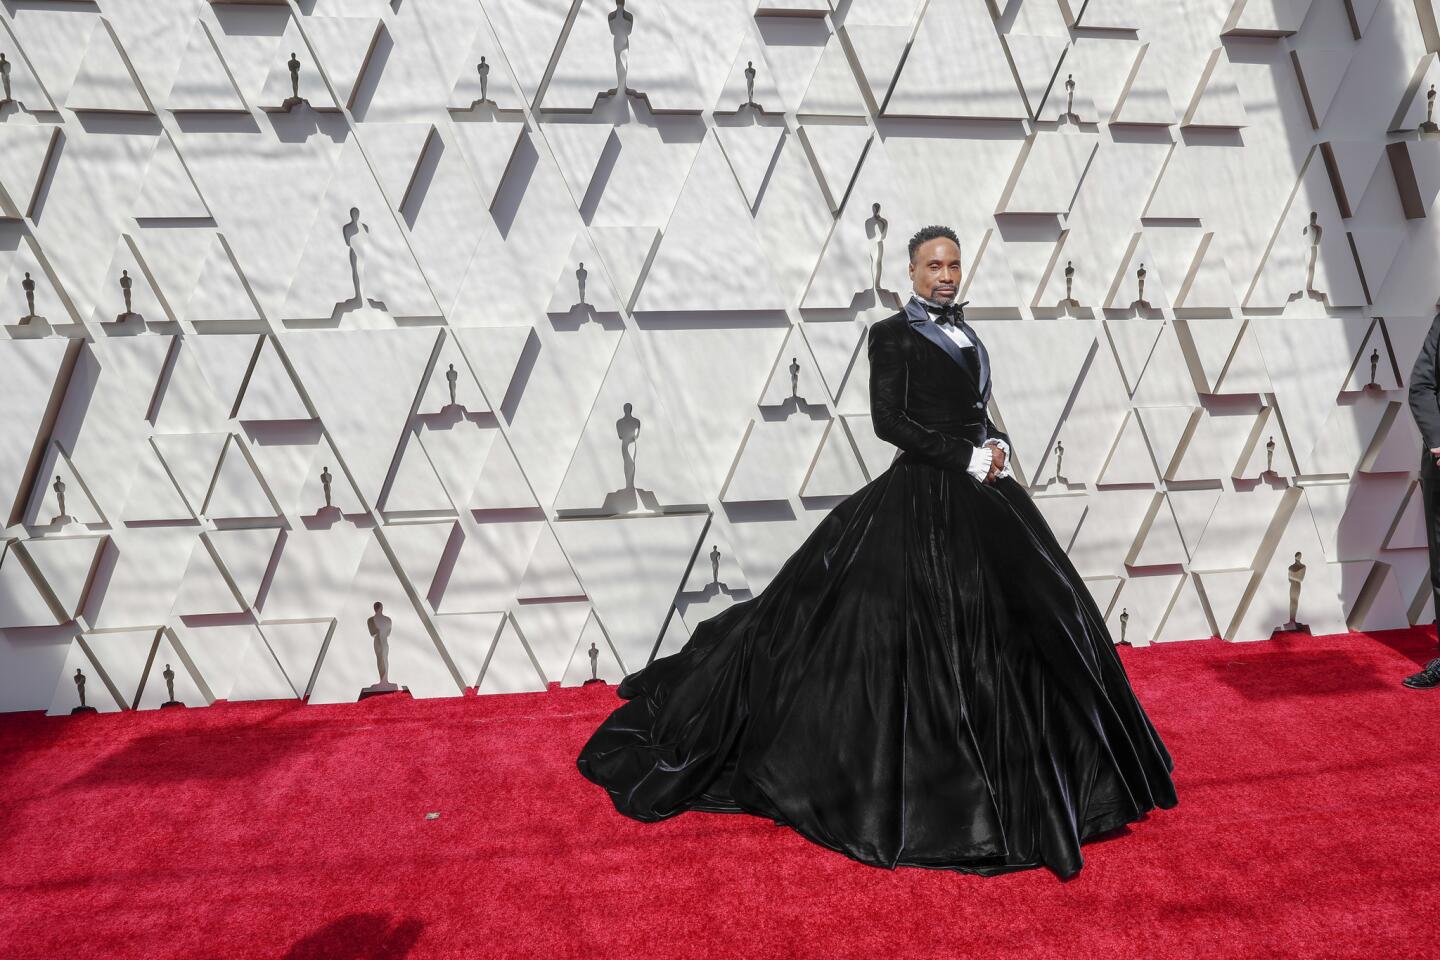 HIT: Billy Porter owned the Oscars red carpet in a custom velvet and satin tuxedo jacket by Christian Siriano over a strapless ball gown. As a result, he became a trending topic on social media during pre-Oscars coverage.